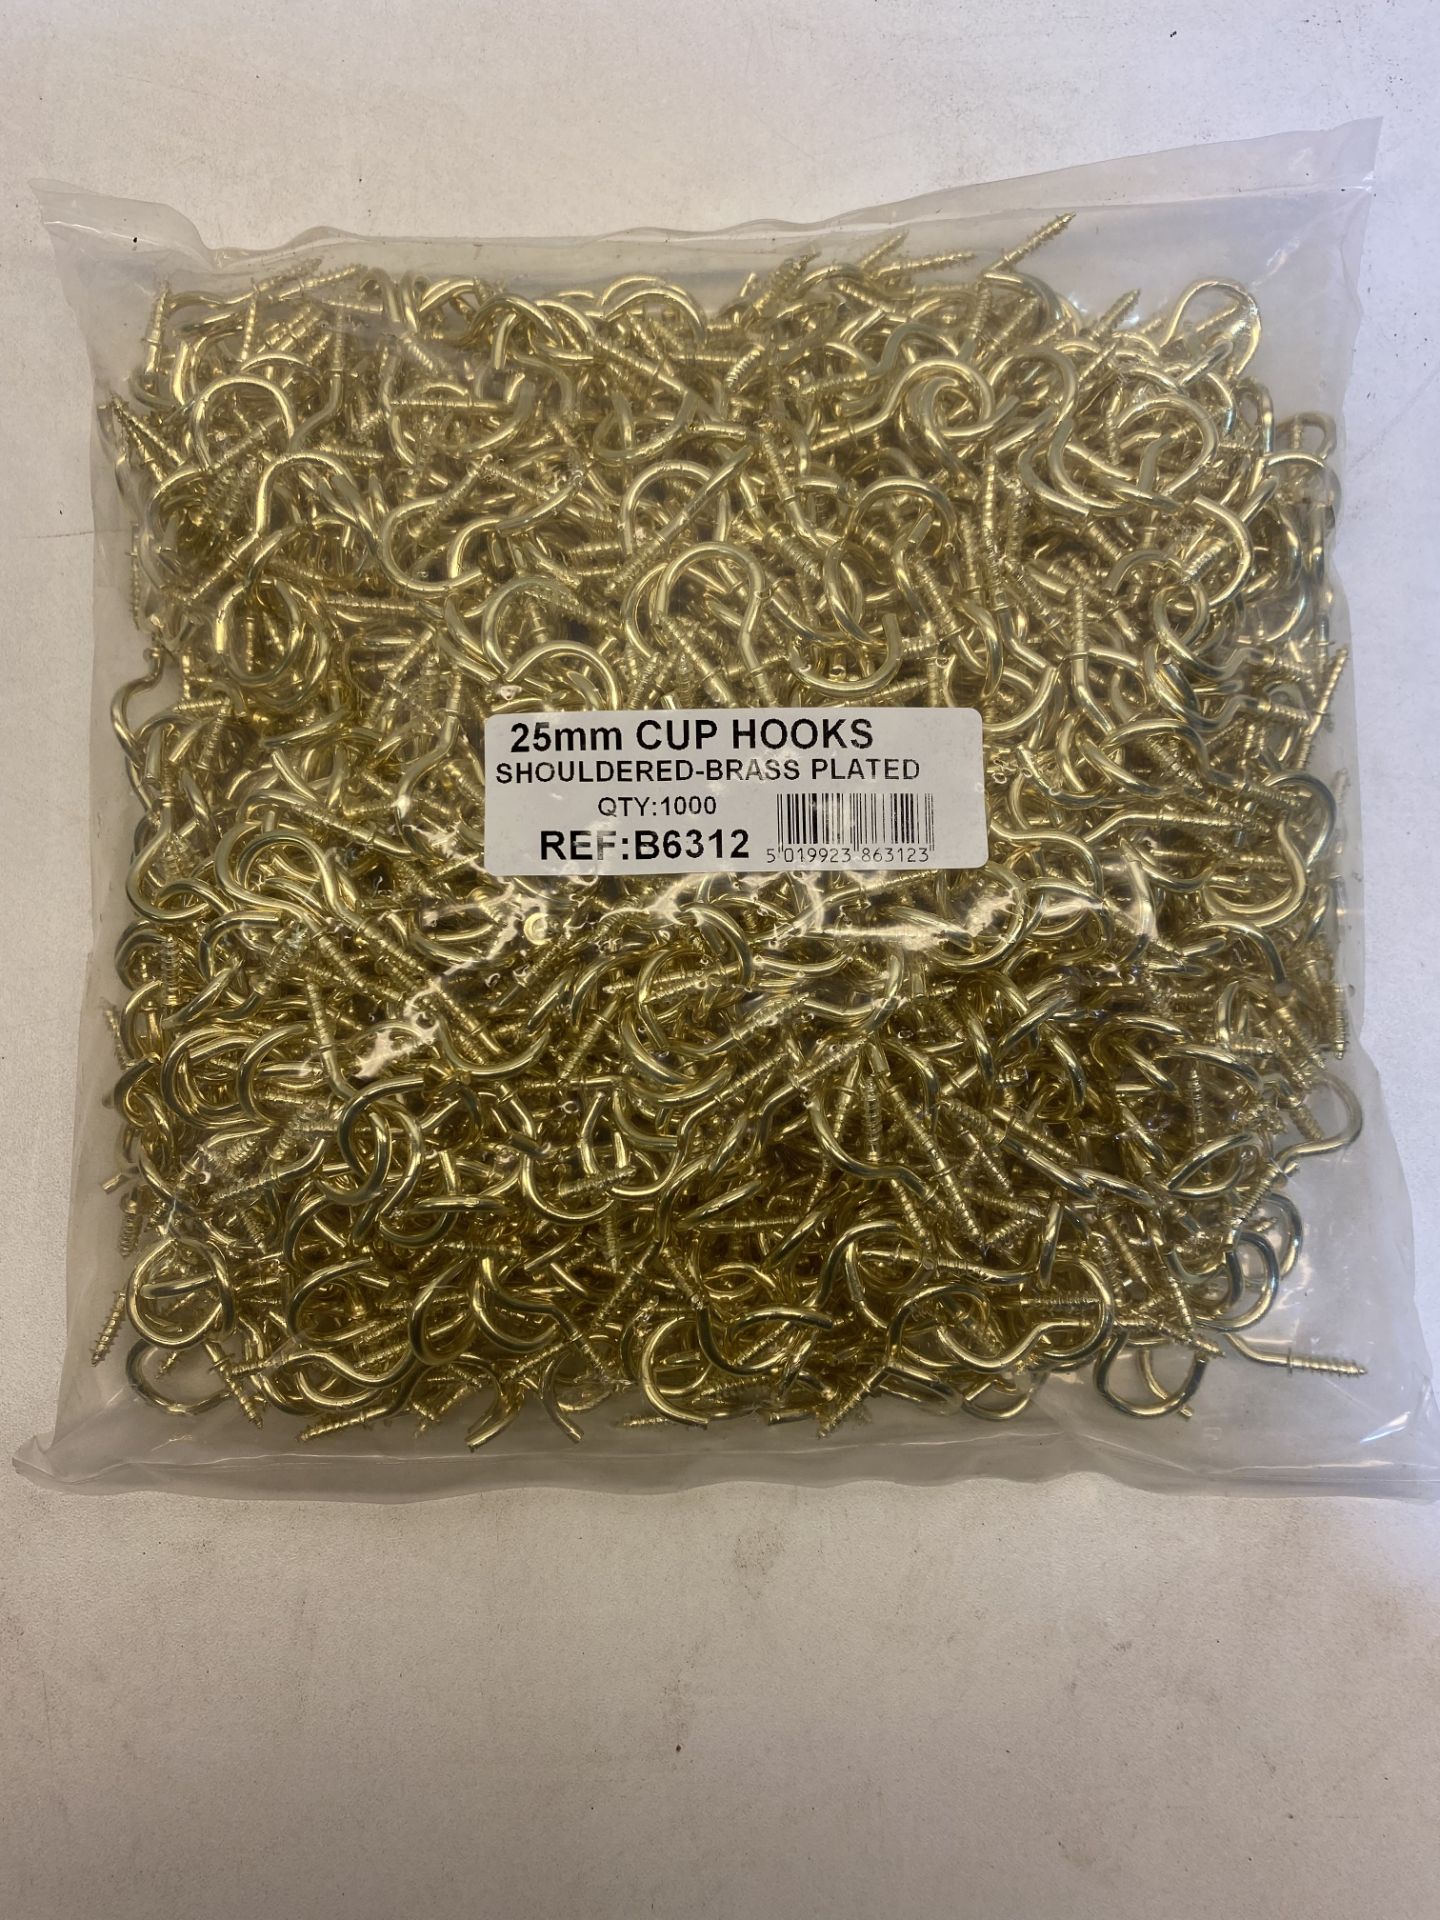 4 x Unbranded Bags Of 25mm Cup Hooks | 1000 Per Bag